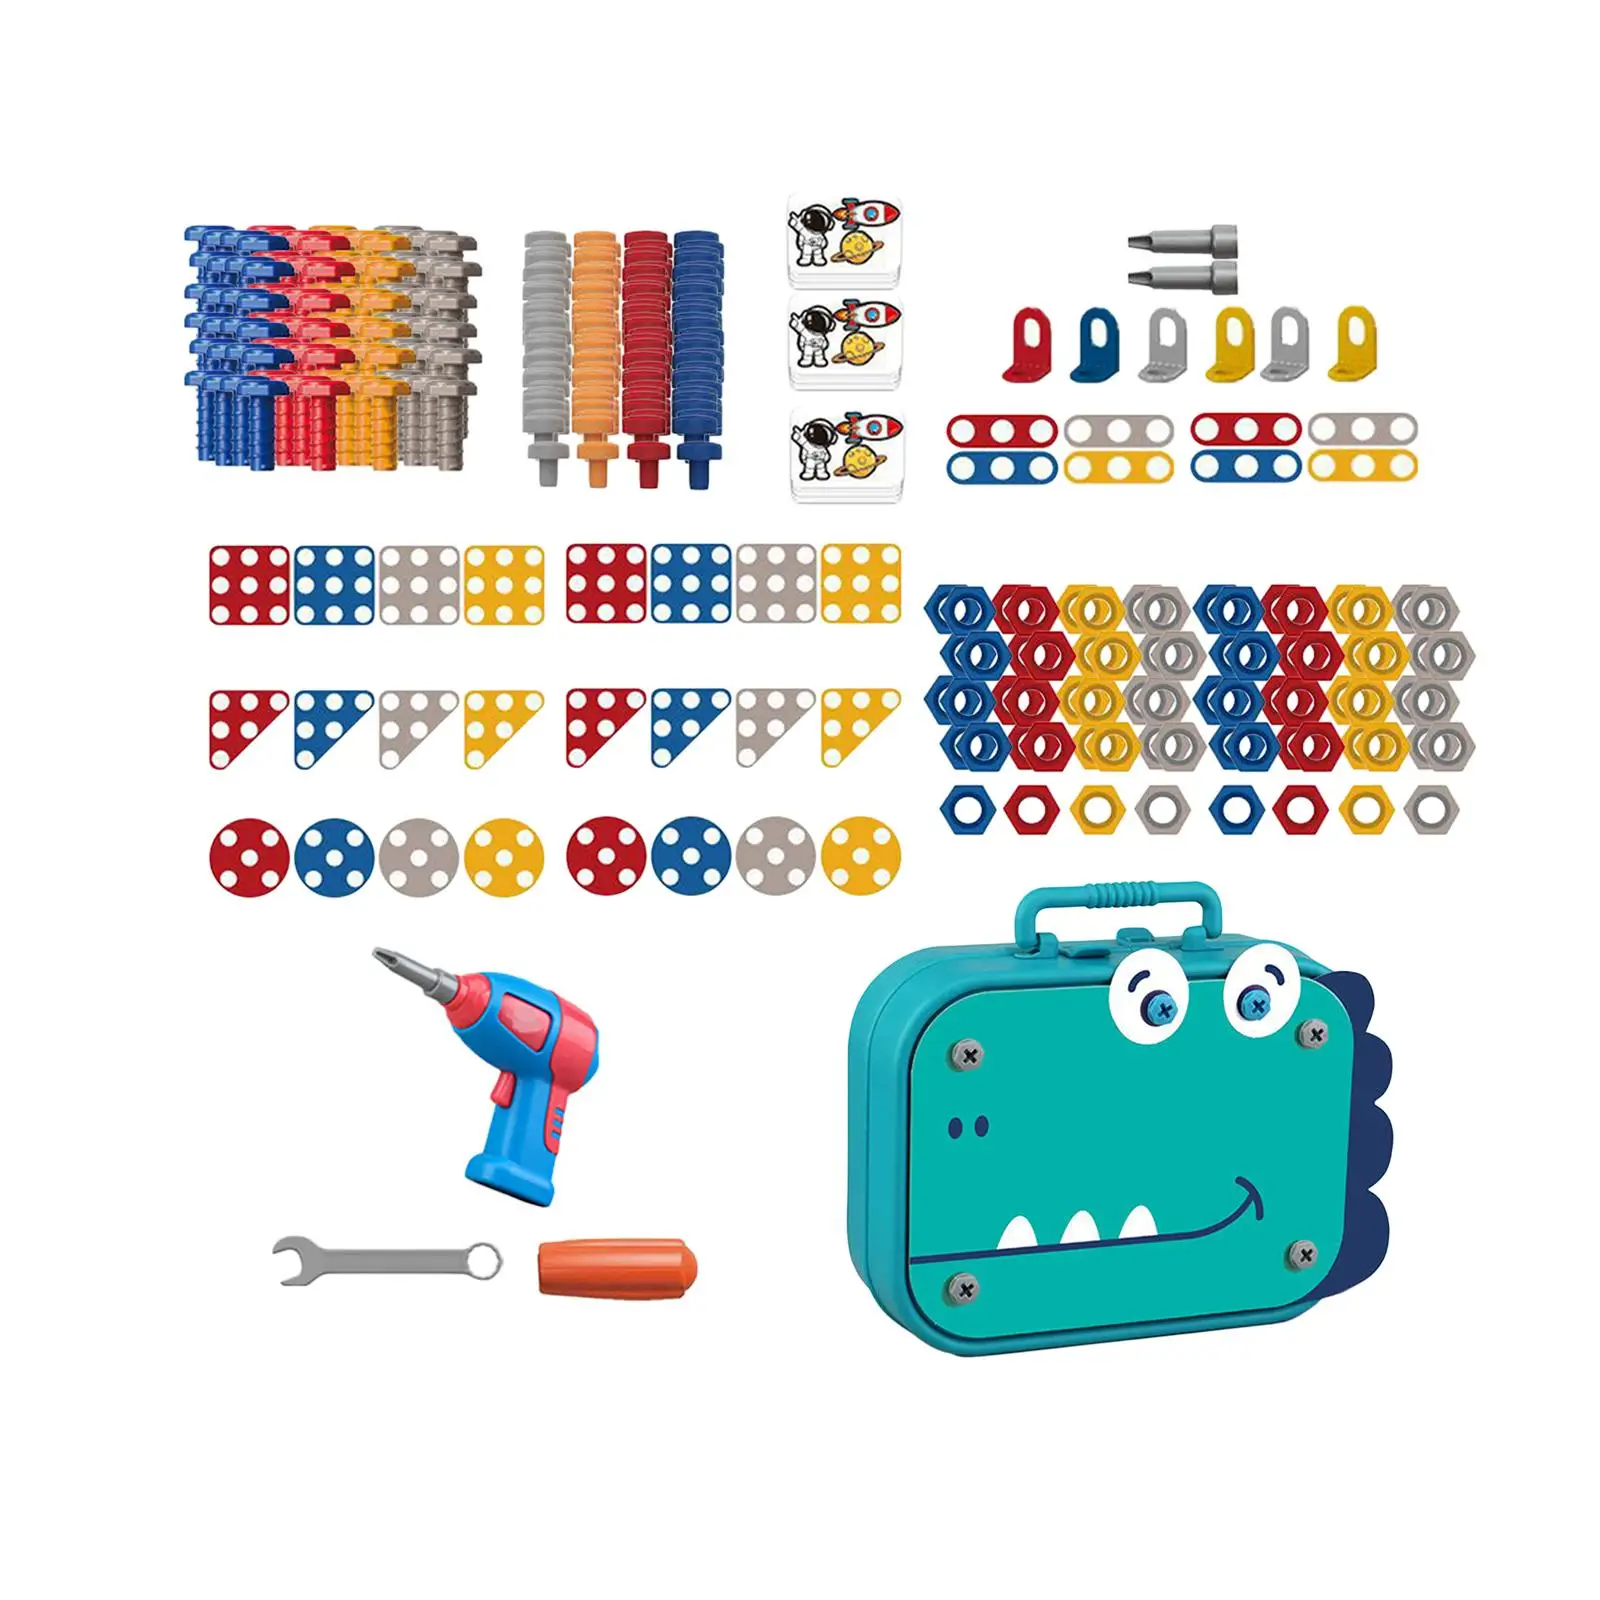 Drill and Screwdriver Toy Set DIY Developmental Educational Stem Learning Toys Preschool Patience Birthday Gift Problem Solving